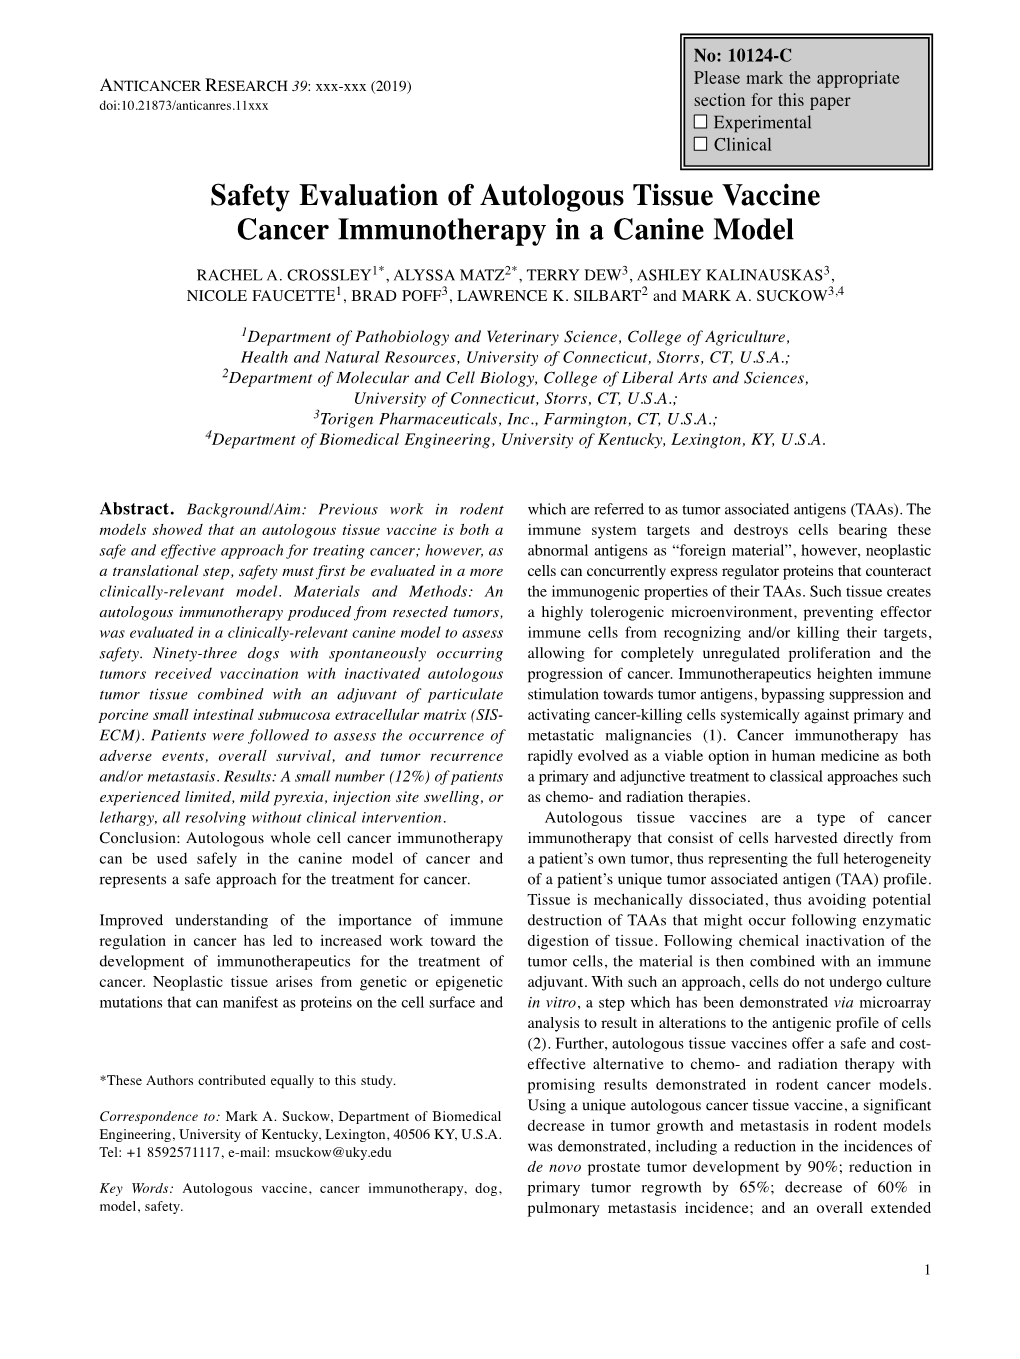 Safety Evaluation of Autologous Tissue Vaccine Cancer Immunotherapy in a Canine Model RACHEL A